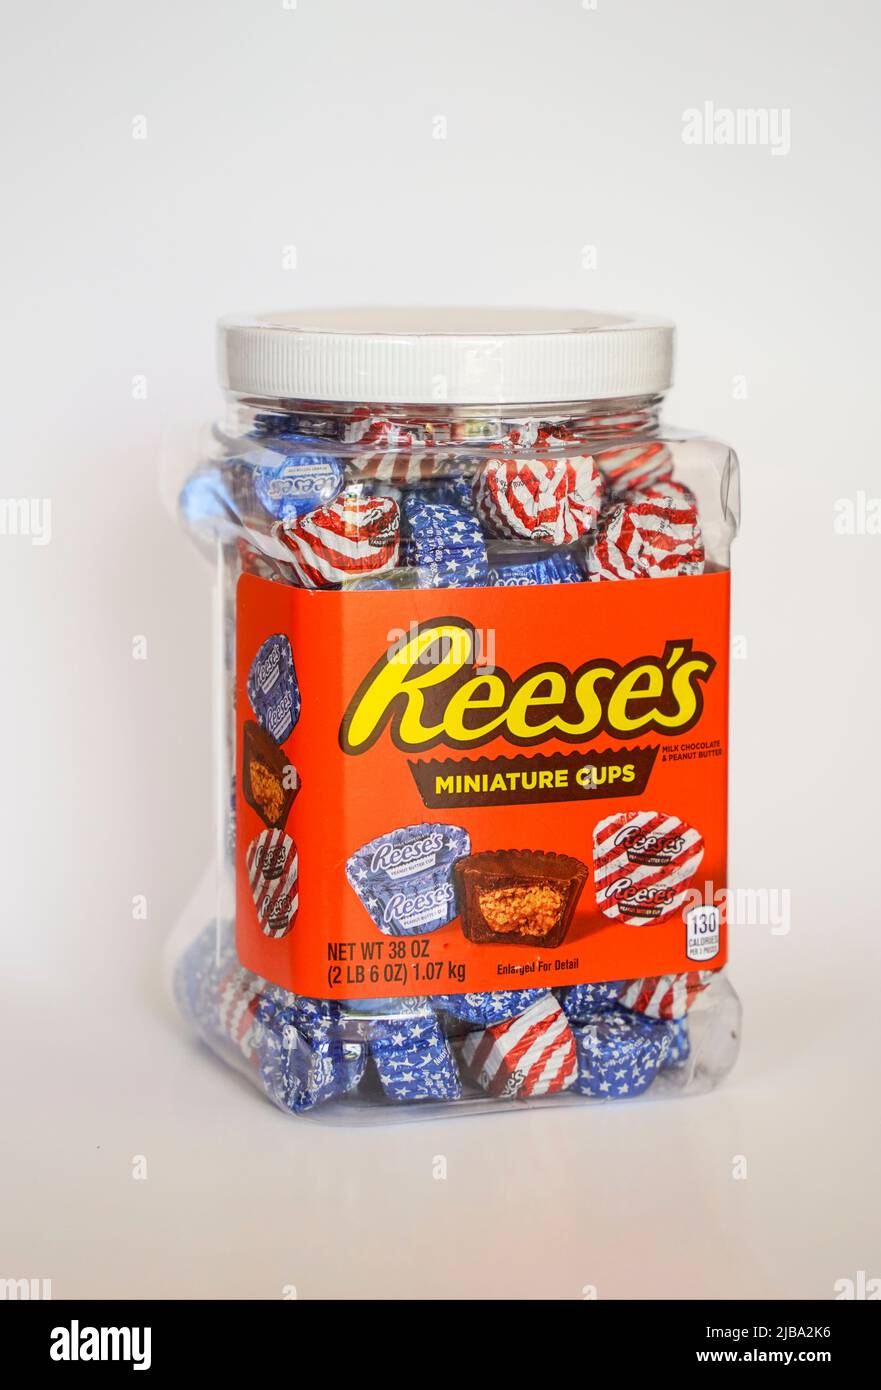 Reese's miniature cups, special edition American flag, Reeses peanut butter cups in a plastic container. Stock Photo